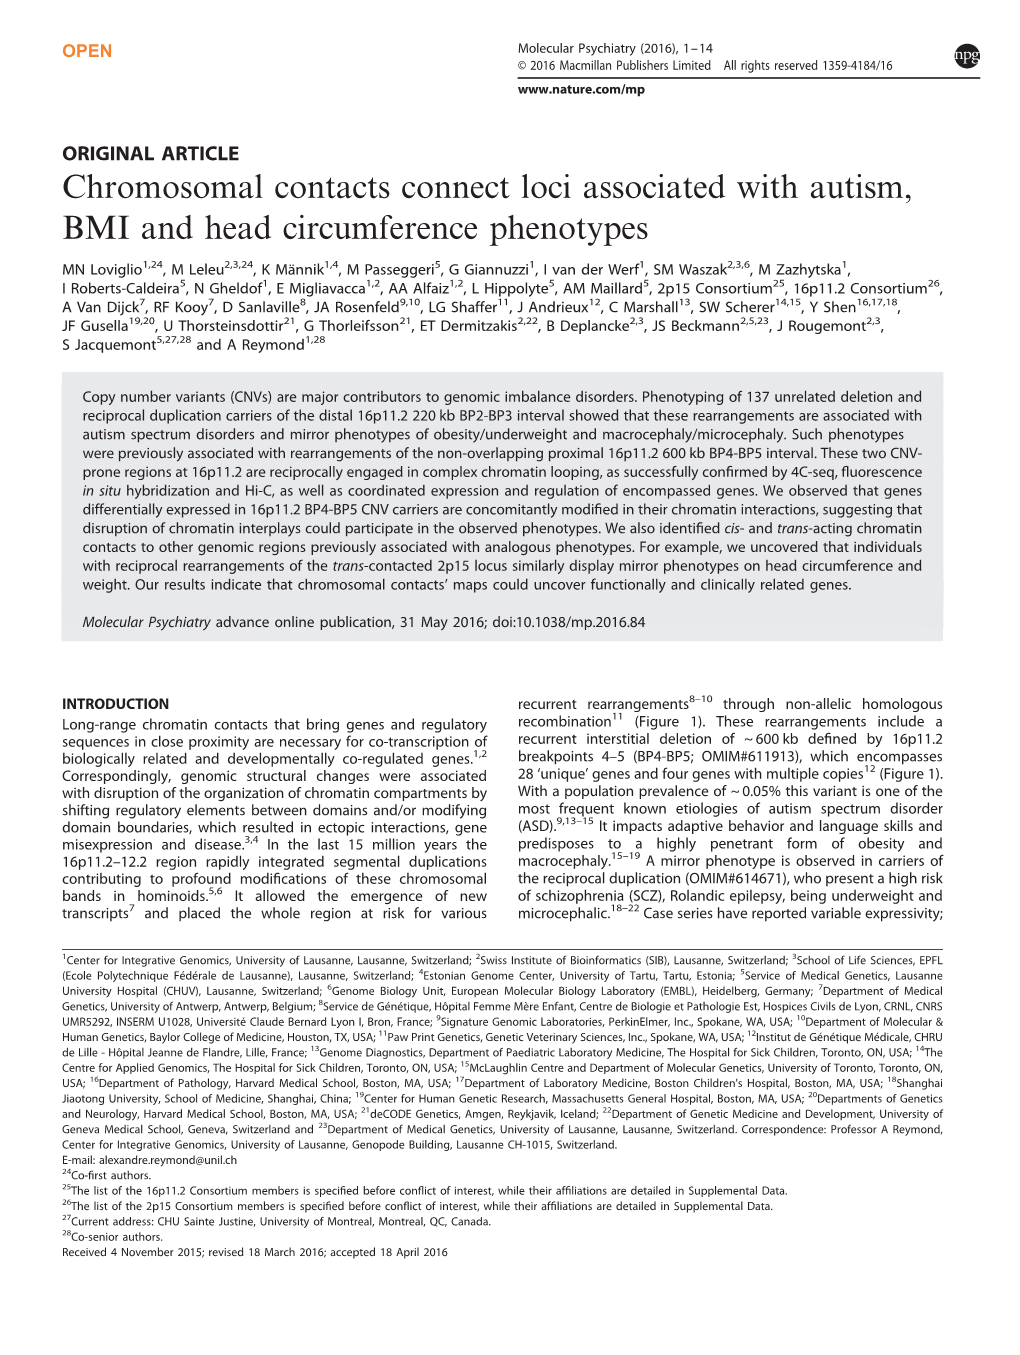 Chromosomal Contacts Connect Loci Associated with Autism, BMI and Head Circumference Phenotypes